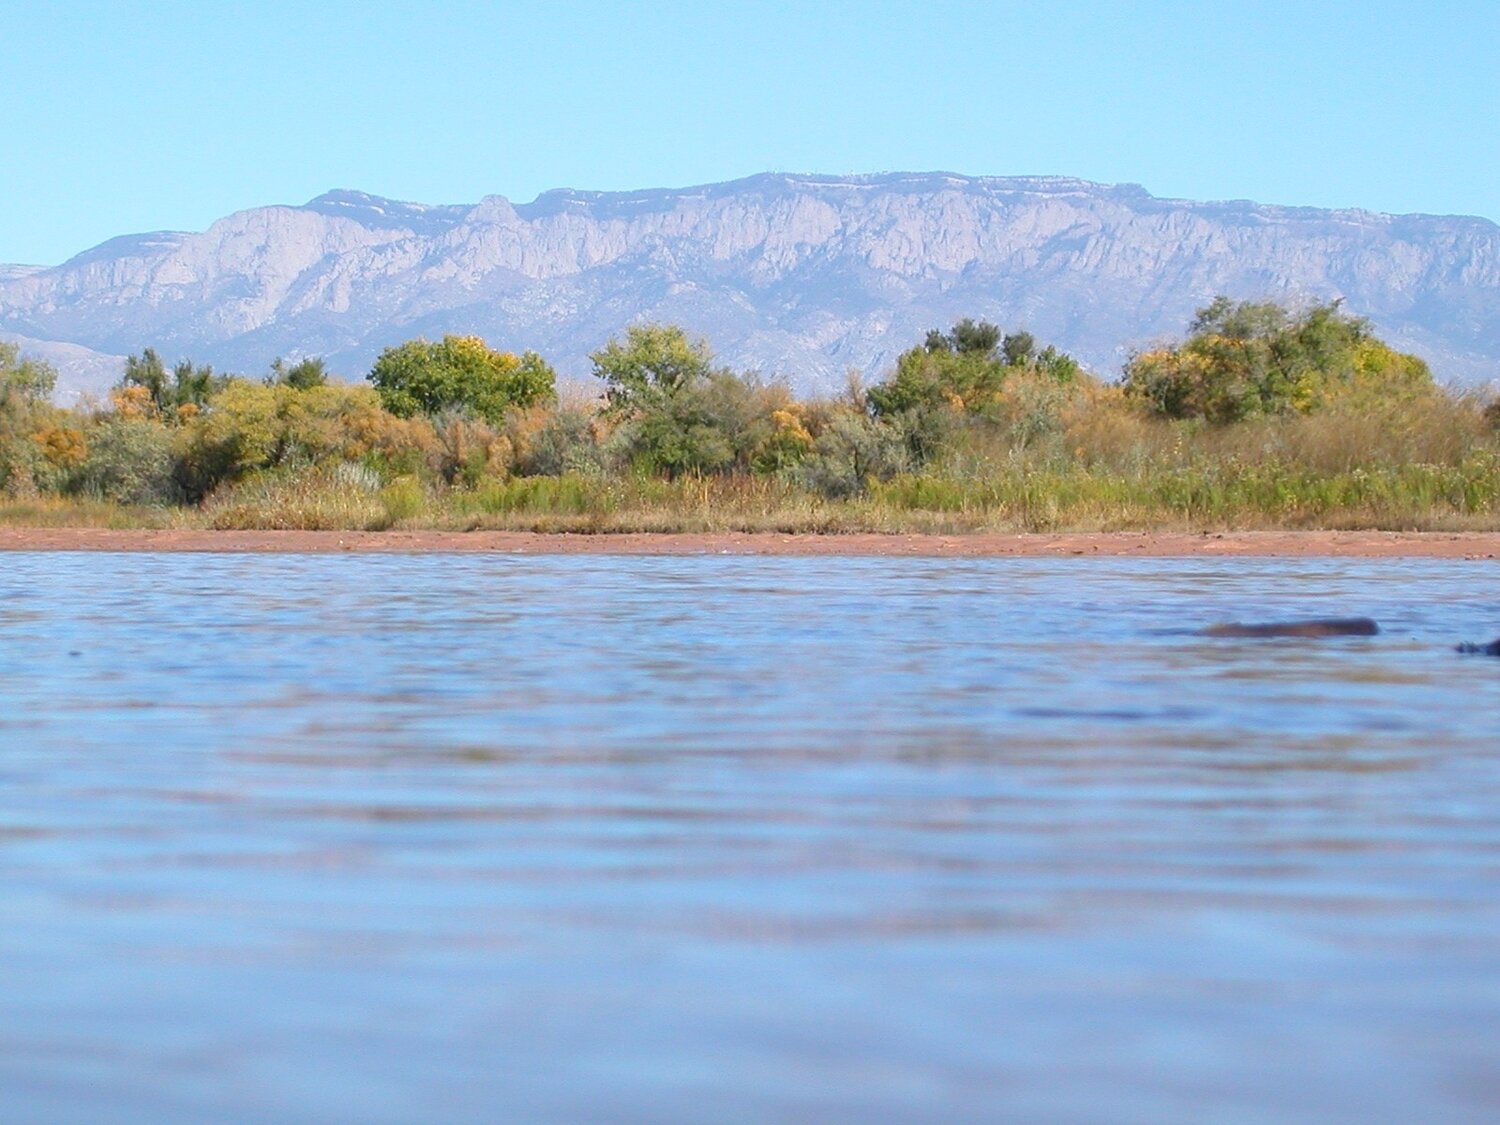 Sandia Crest as seen from the Rio Grande’s protected riparian bosque. (photo by Matt Schmader)